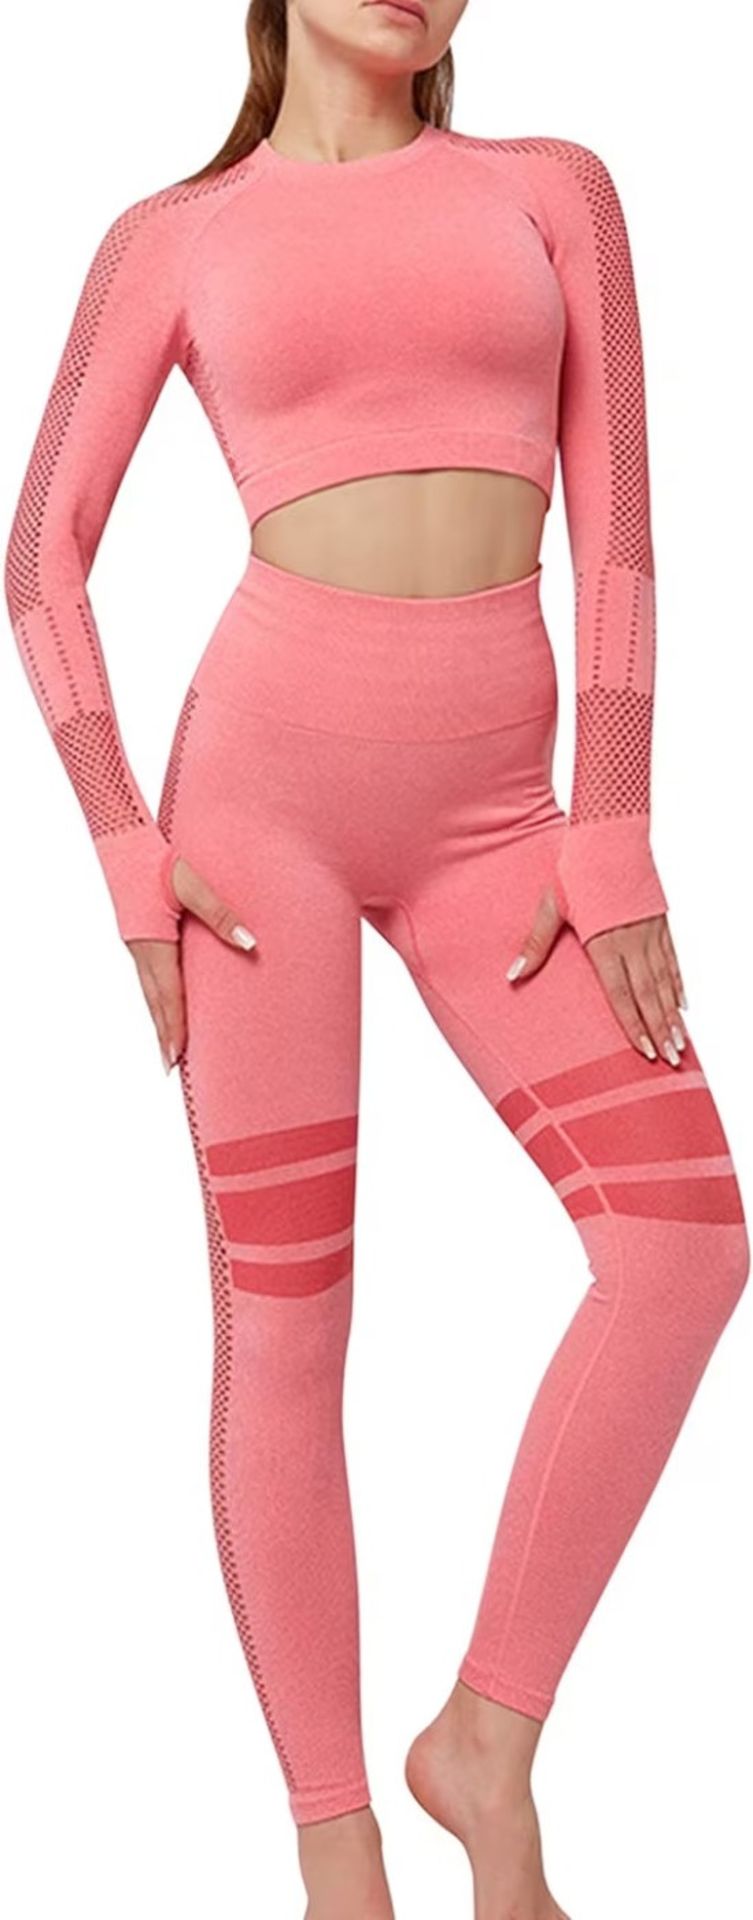 BRAND NEW Sport Outfit Set for Women Hollow-Out Crop Top + High Waist Fitness Leggings